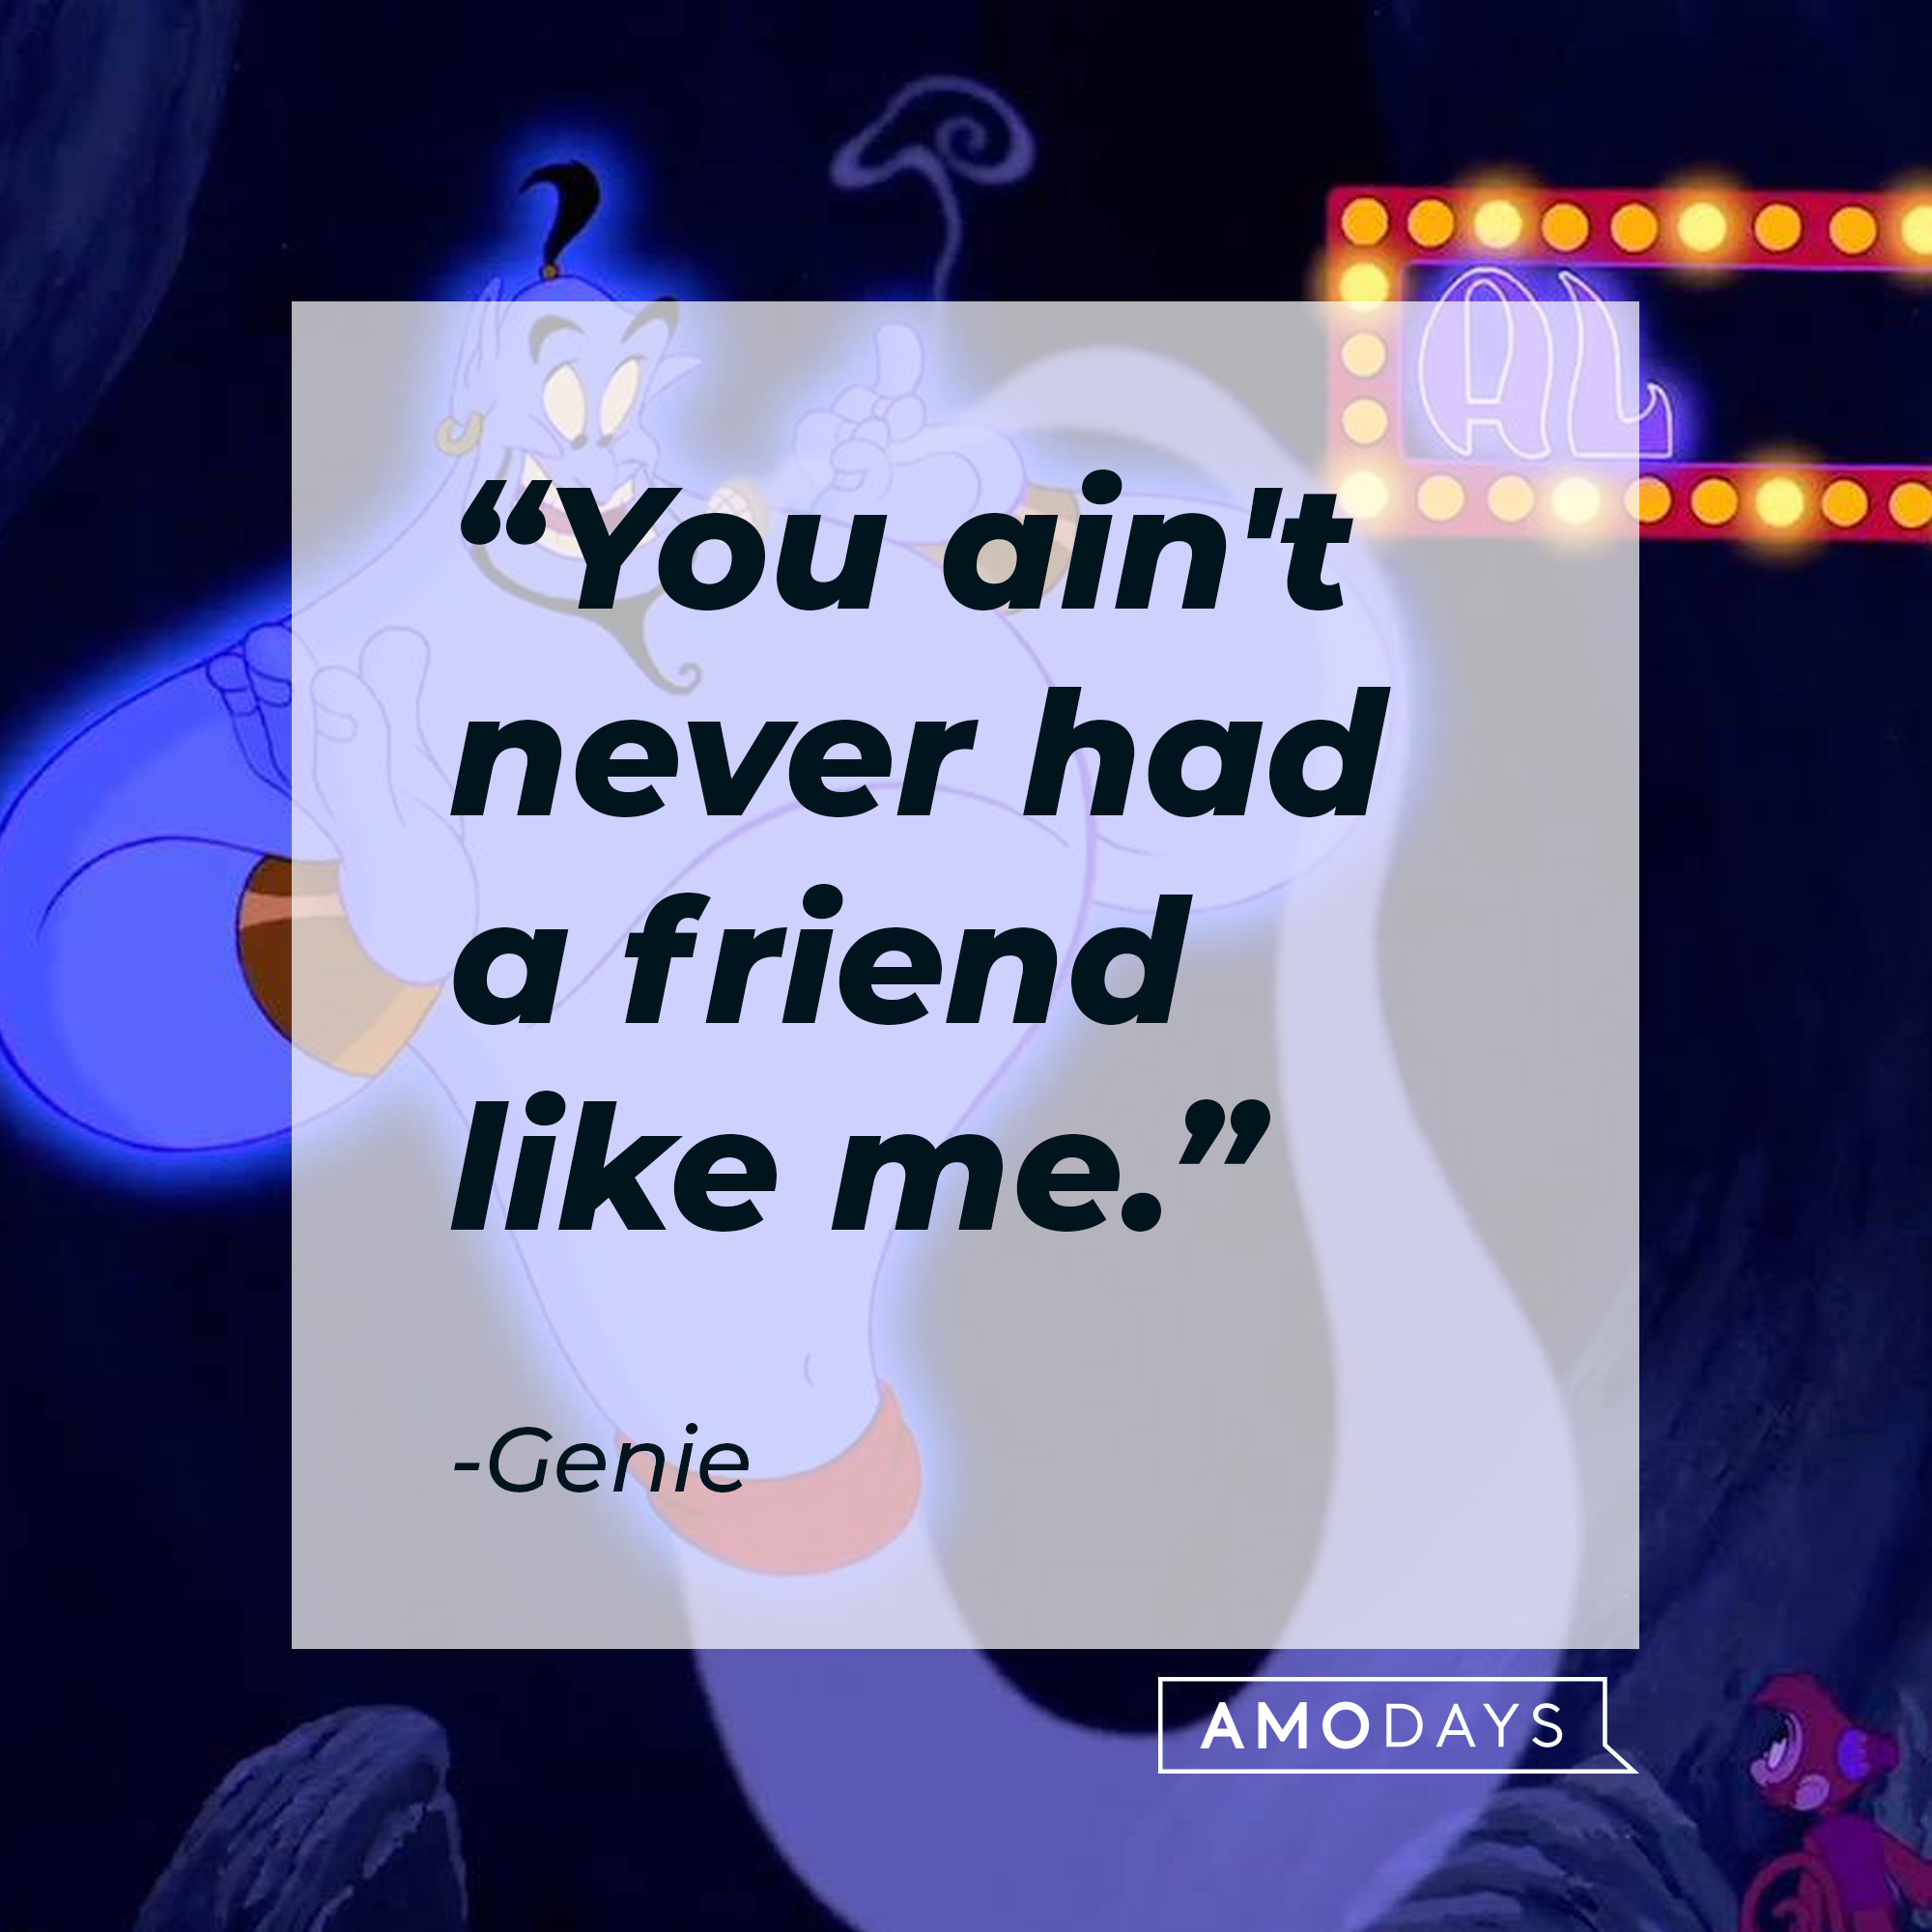 The animated Genie with his quote: "You ain't never had a friend like me." | Source: Facebook.com/DisneyAladdin